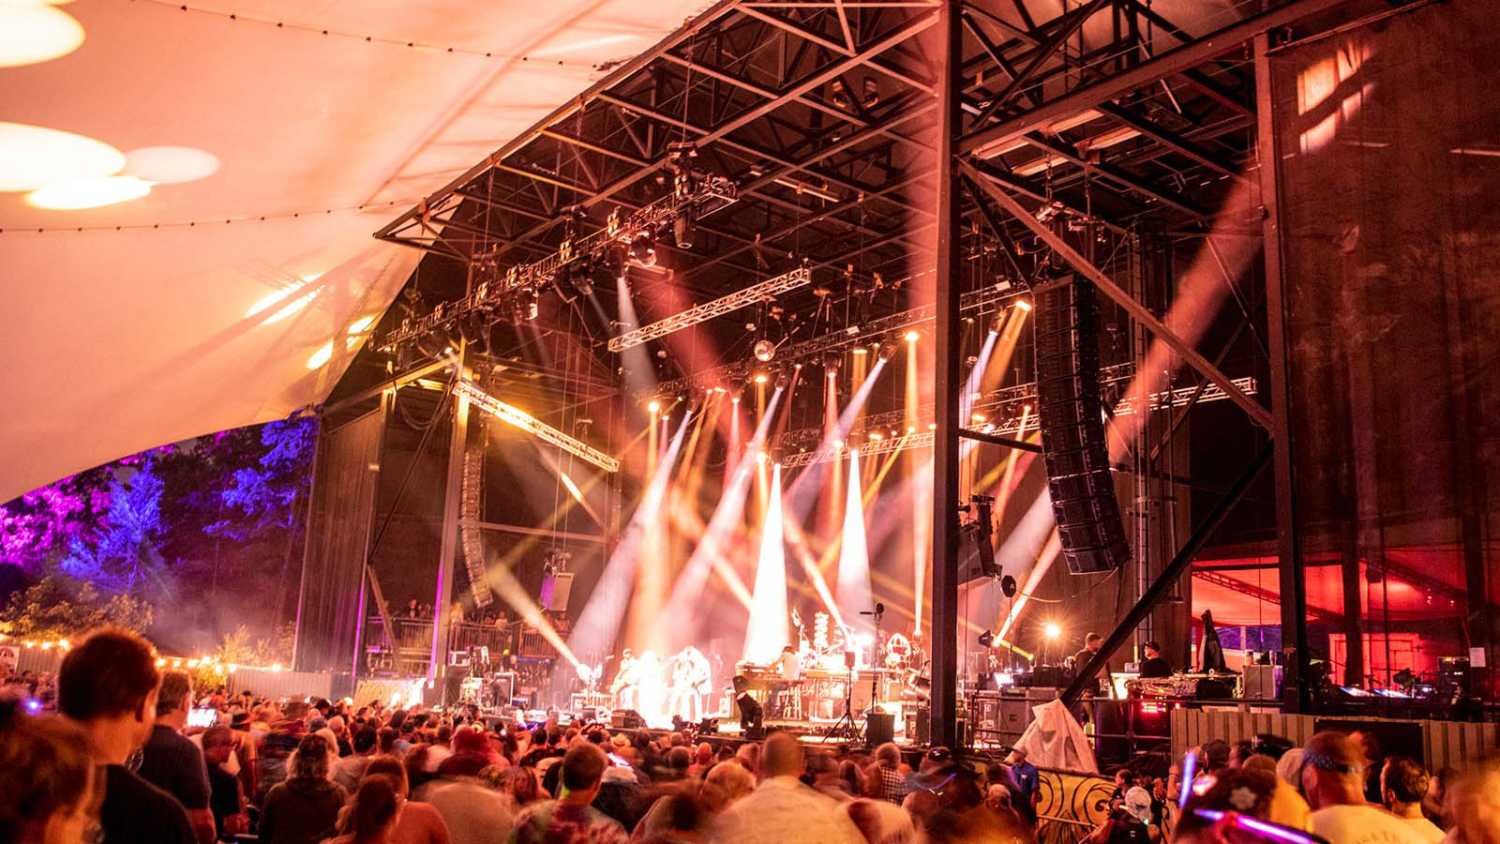 The two main hangs at the Peach Stage each comprised 12 Panther line array loudspeakers